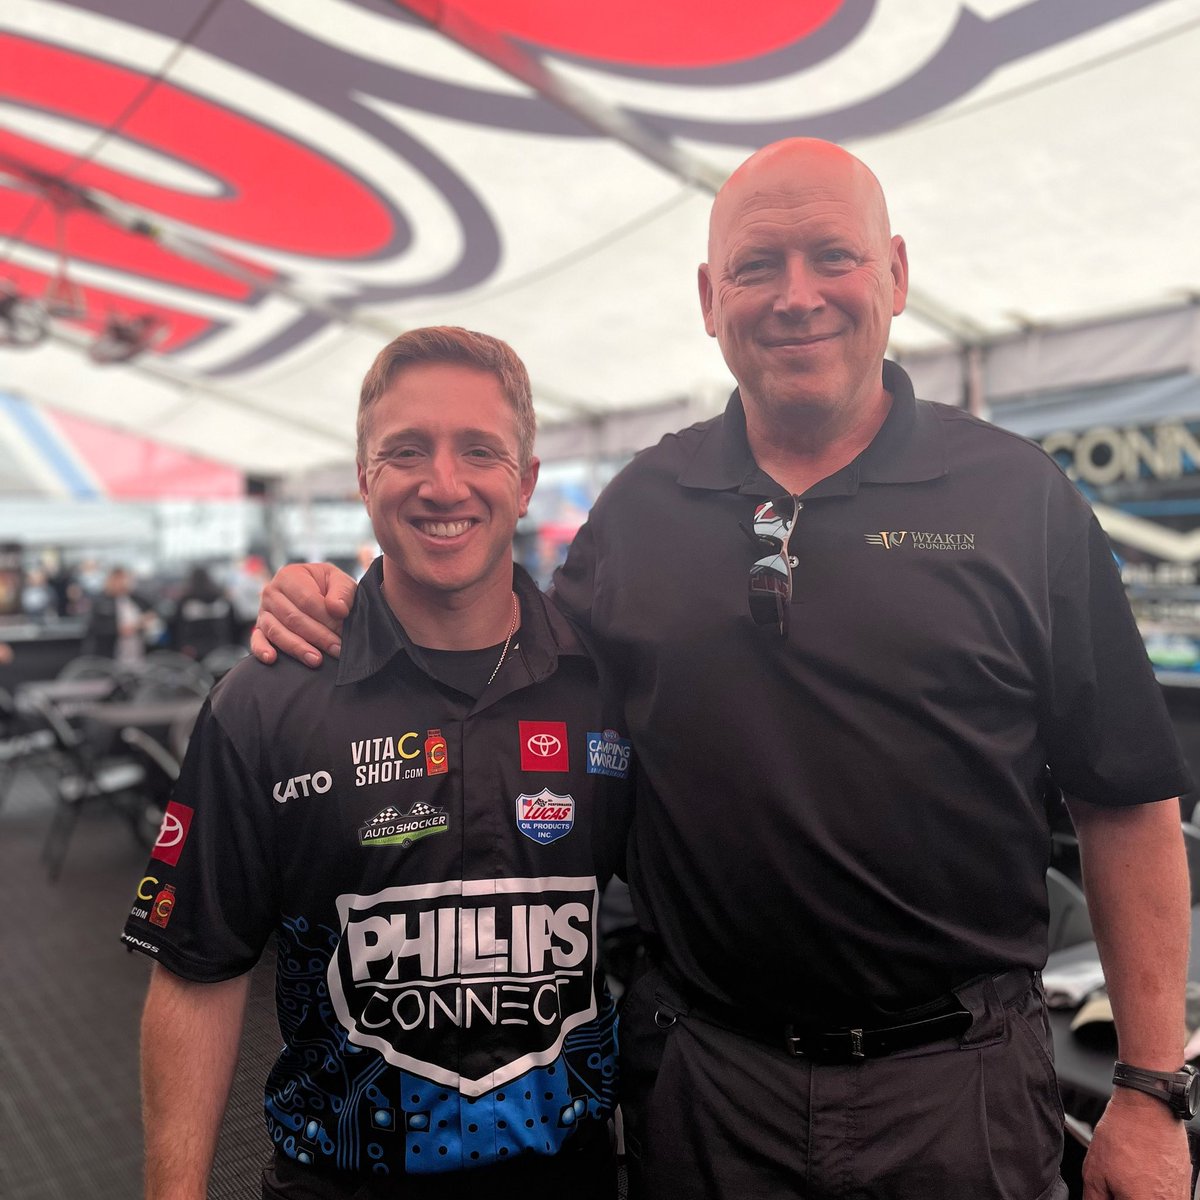 Thrilled to have the CEO and Founder of @WyakinStrong, Jeff Bacon out at the track with my @phillips_conn team this weekend! #PhillipsFamily #WyakinFoundation